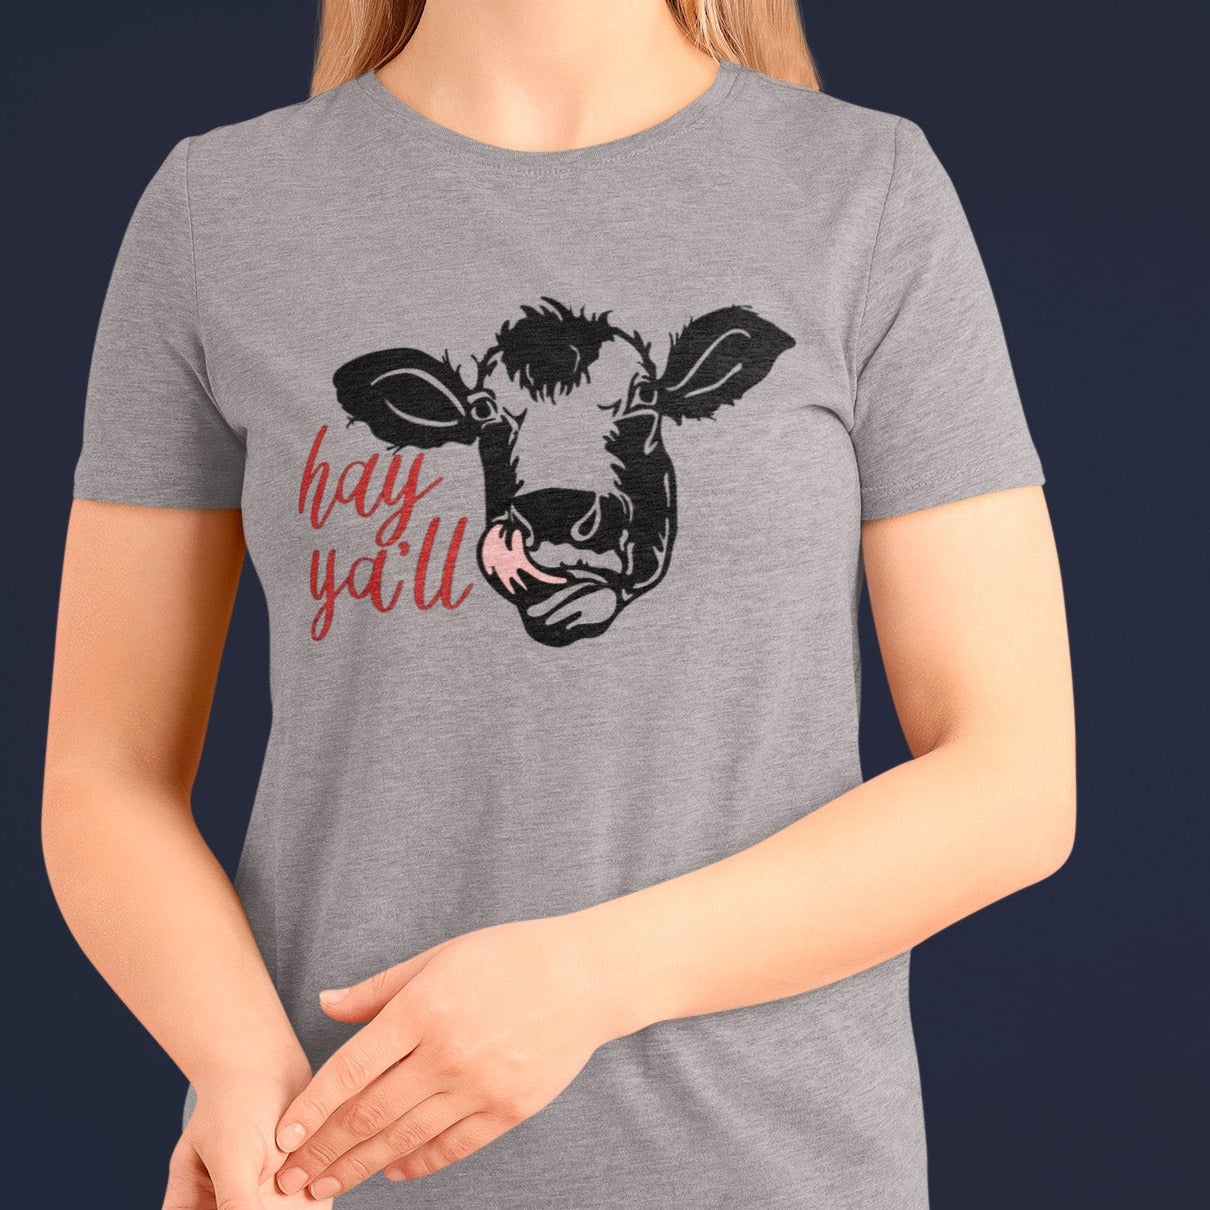 hey-yall-athletic-heather-grey-t-shirt-cow-womens-mockup-featuring-a-blonde-cropped-face-woman